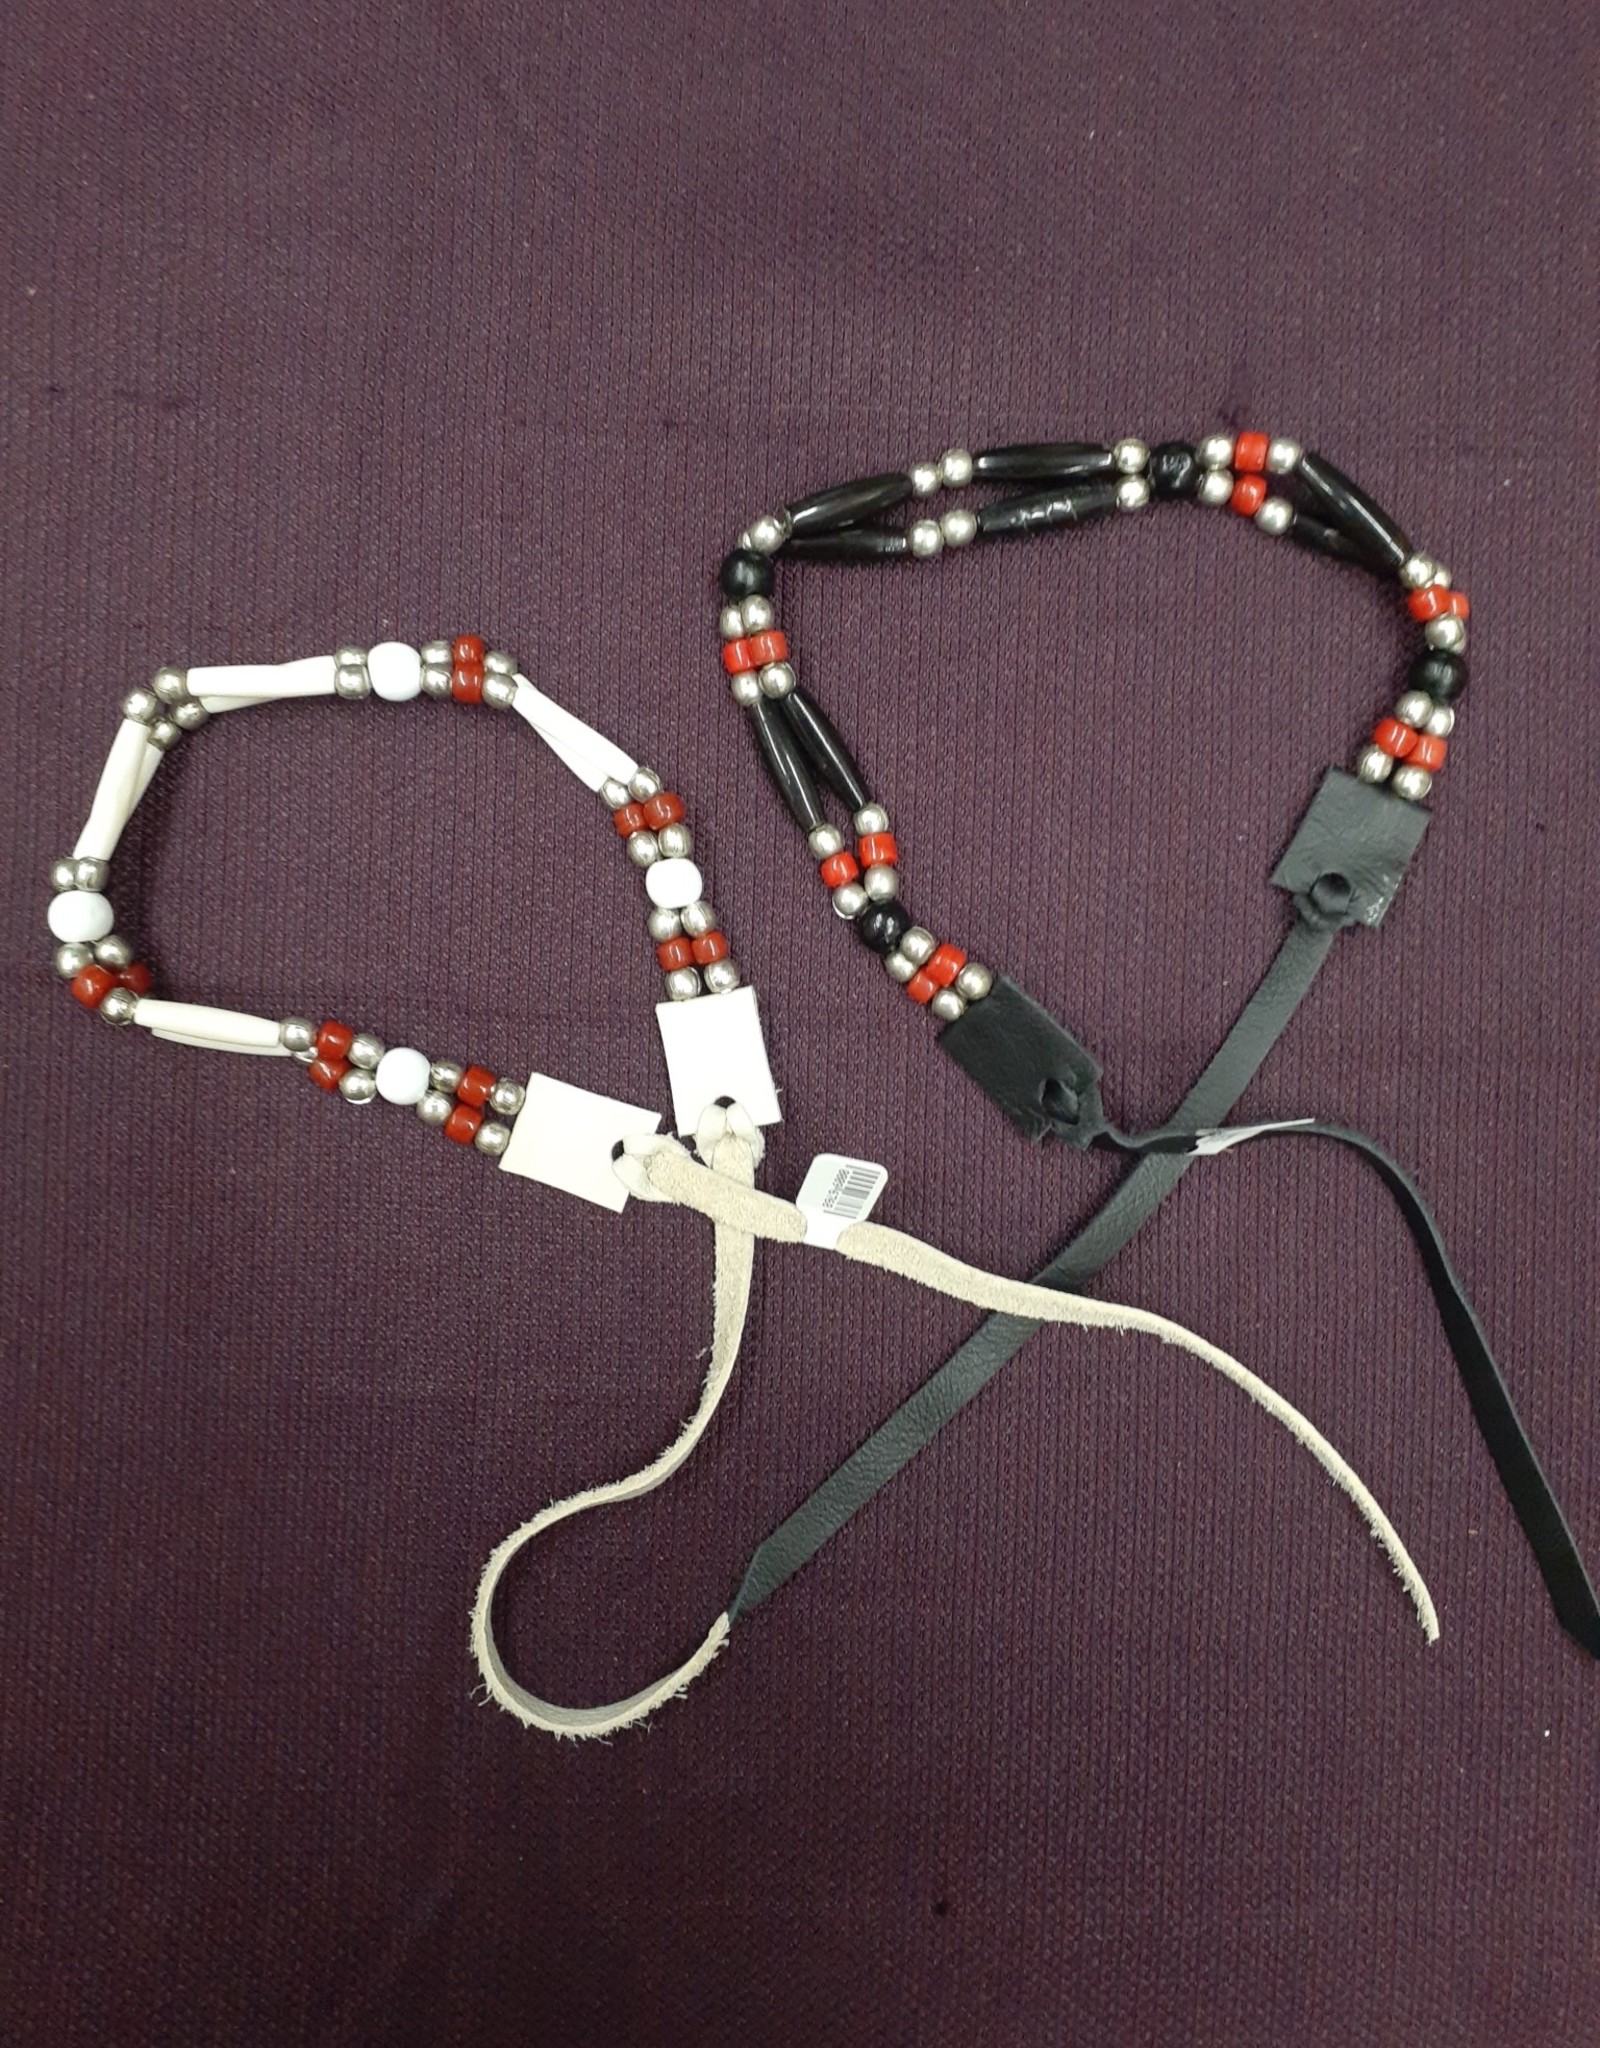 Handcrafted Bone Chokers by First Nations artist Mike White